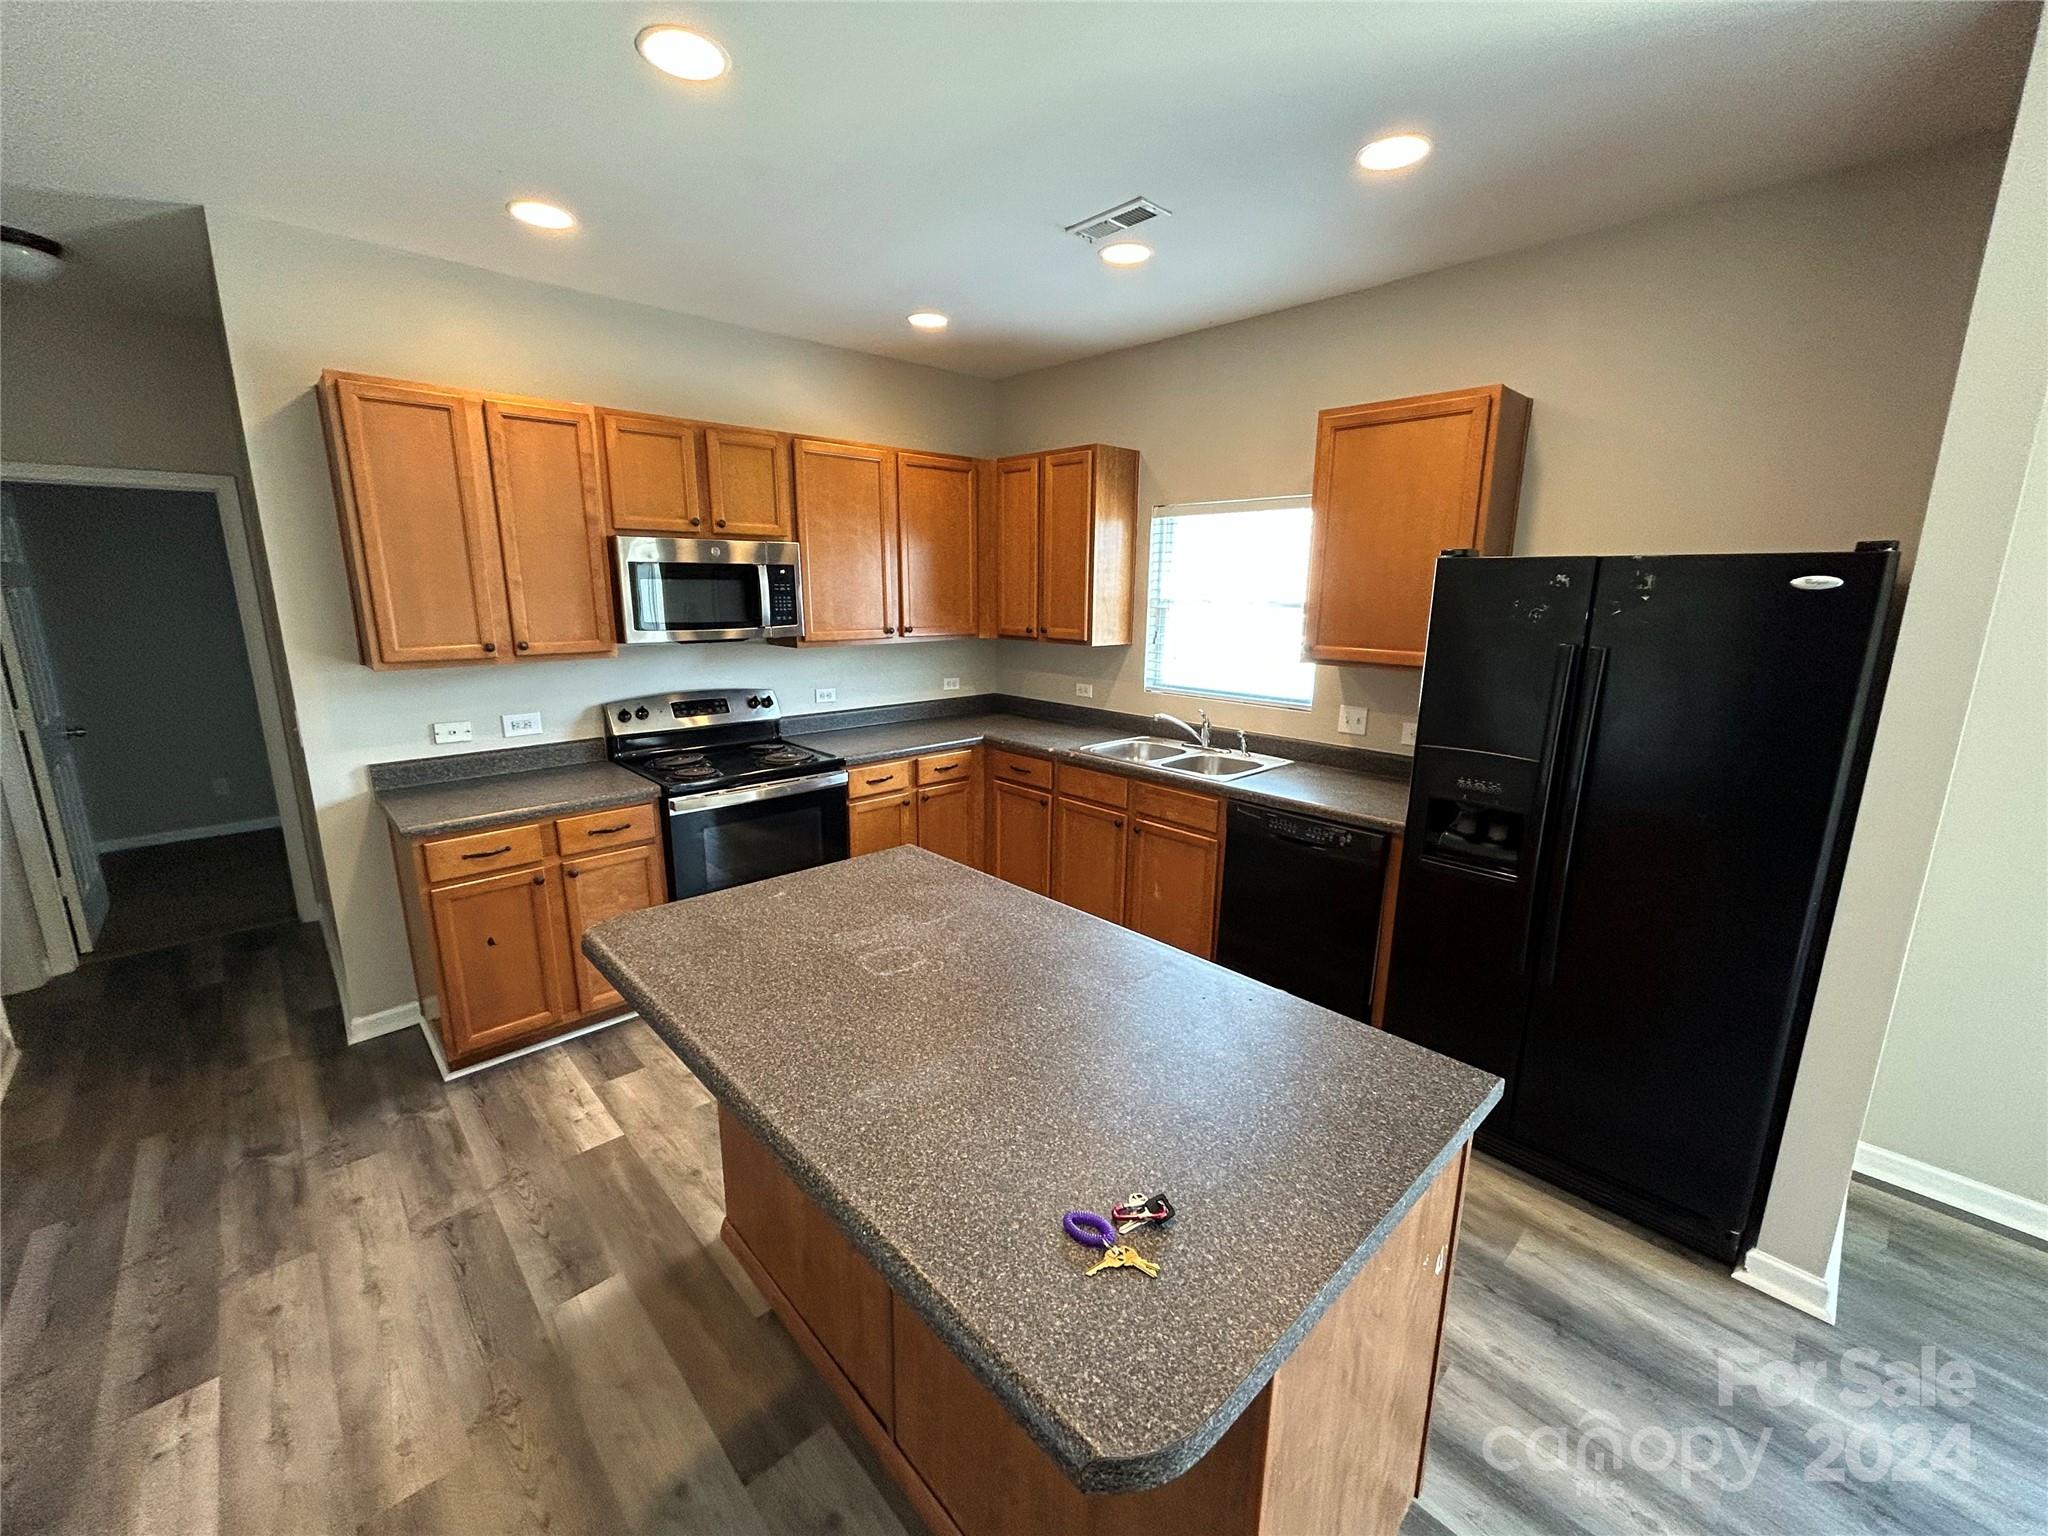 a kitchen with stainless steel appliances granite countertop a refrigerator a sink a stove a dining table and chairs